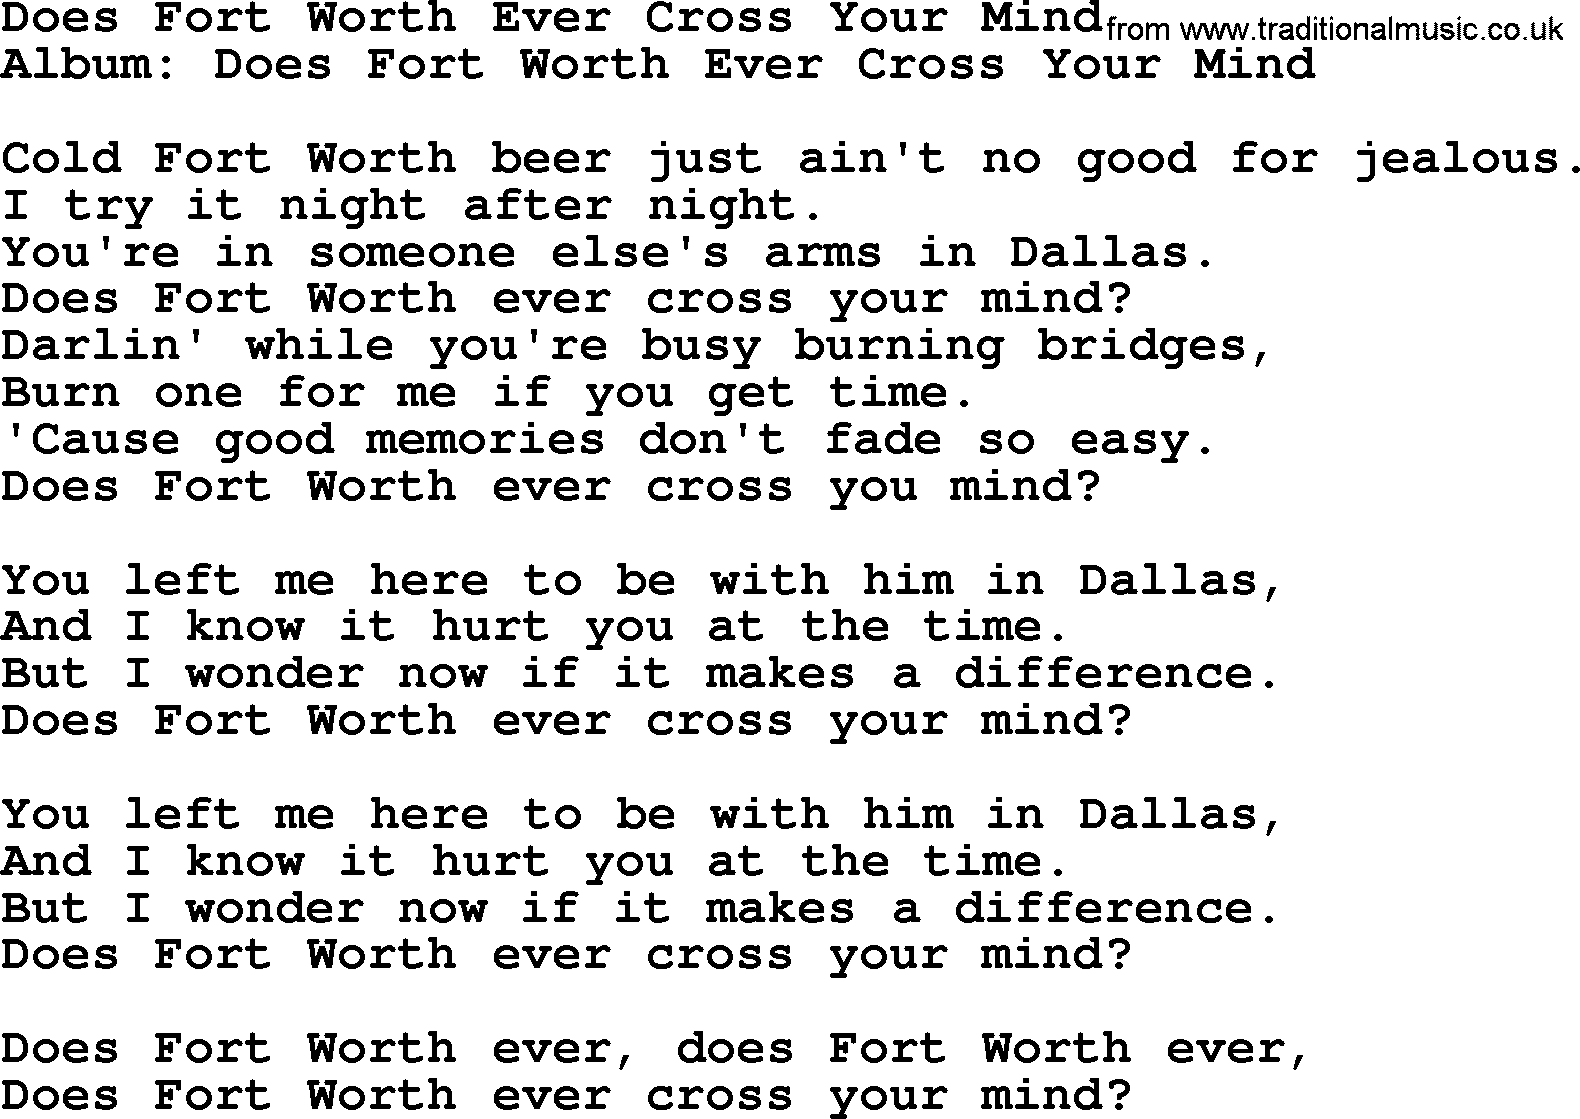 George Strait song: Does Fort Worth Ever Cross Your Mind, lyrics